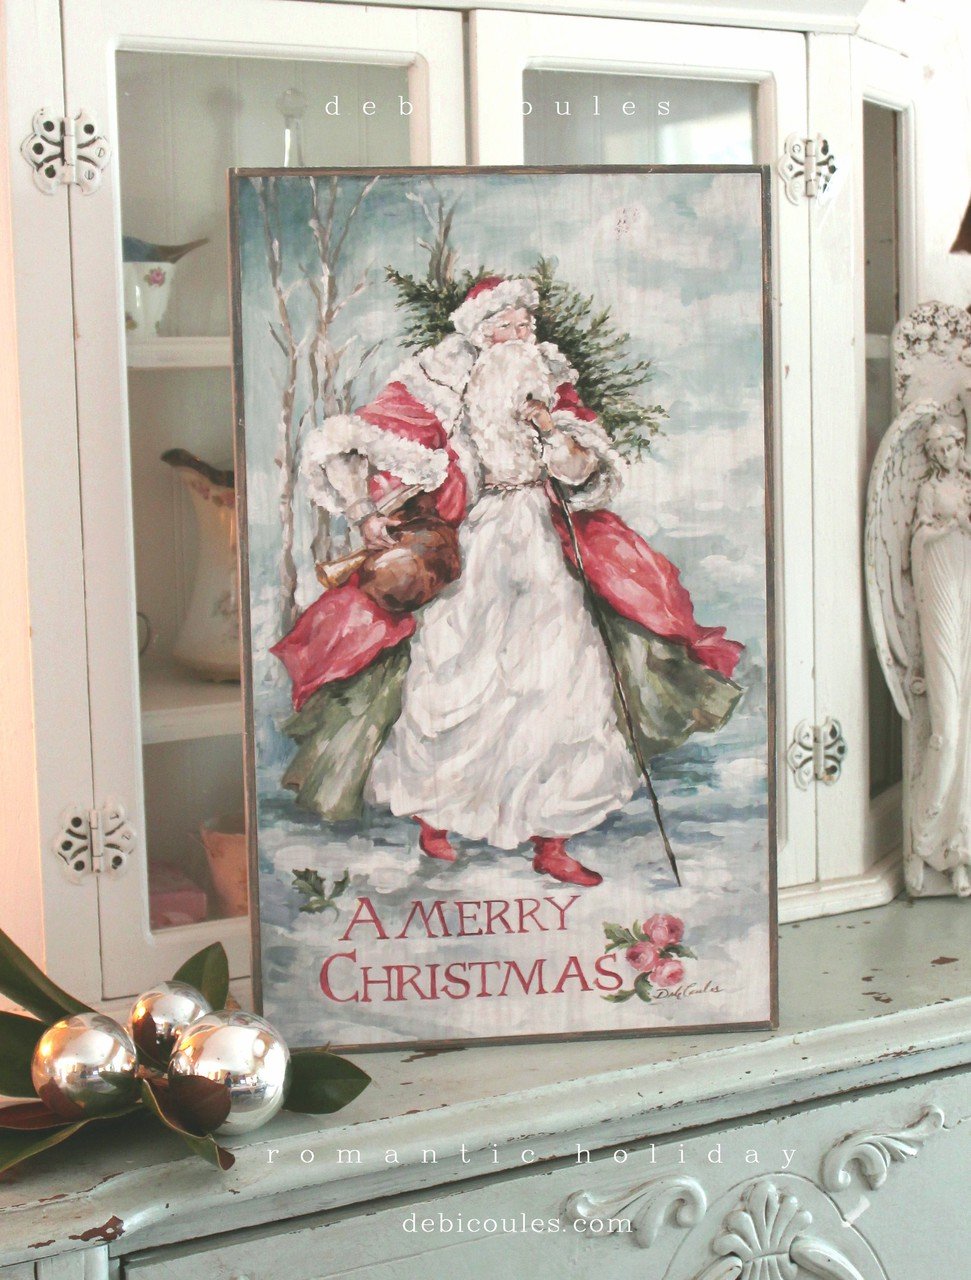 A wonderful Christmas painting, "North Woods Santa" by Debi Coules features a vintage-style Santa Claus arriving Christmas morning through the snow. This Holiday wood Print captures the feel of the long past Christmas Season.Vintage Santa Painting for a Rustic Christmas Home Decor. Printed on wood and framed with barnwood.